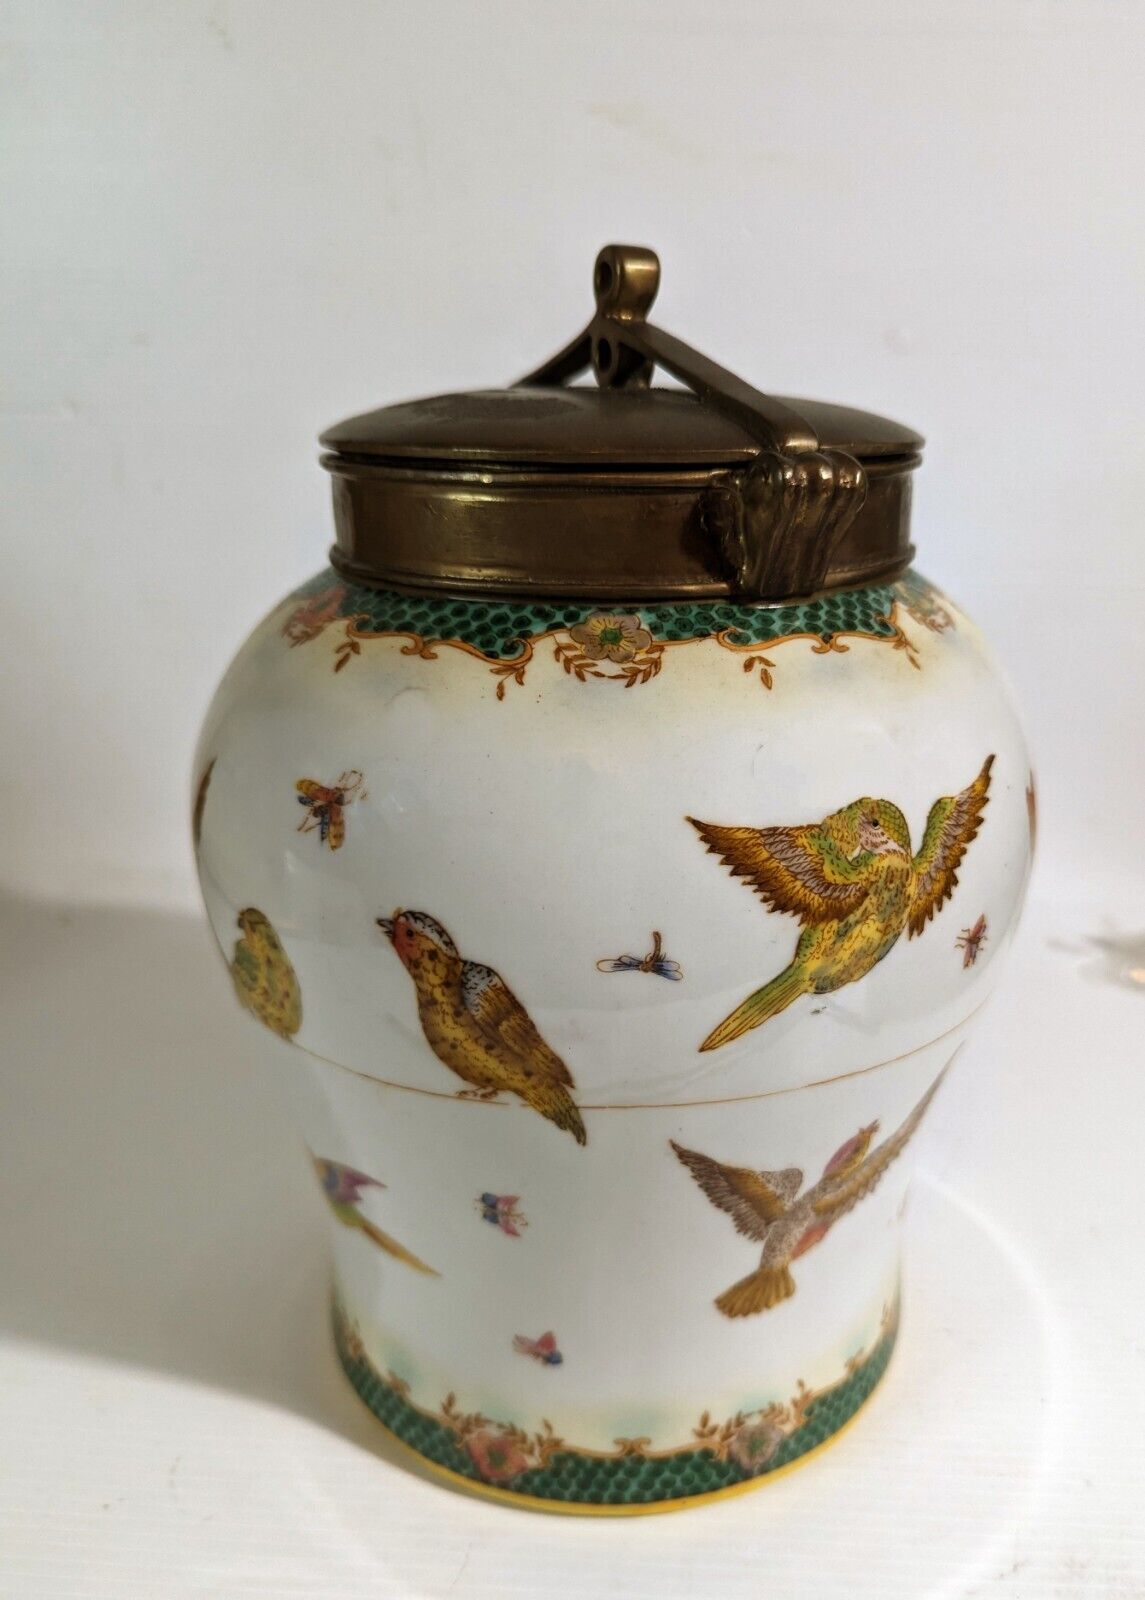 Porcelain Urn Heavy Bronze Lid Tozai Home w/Birds, Bees & Dragonflies Hand Done